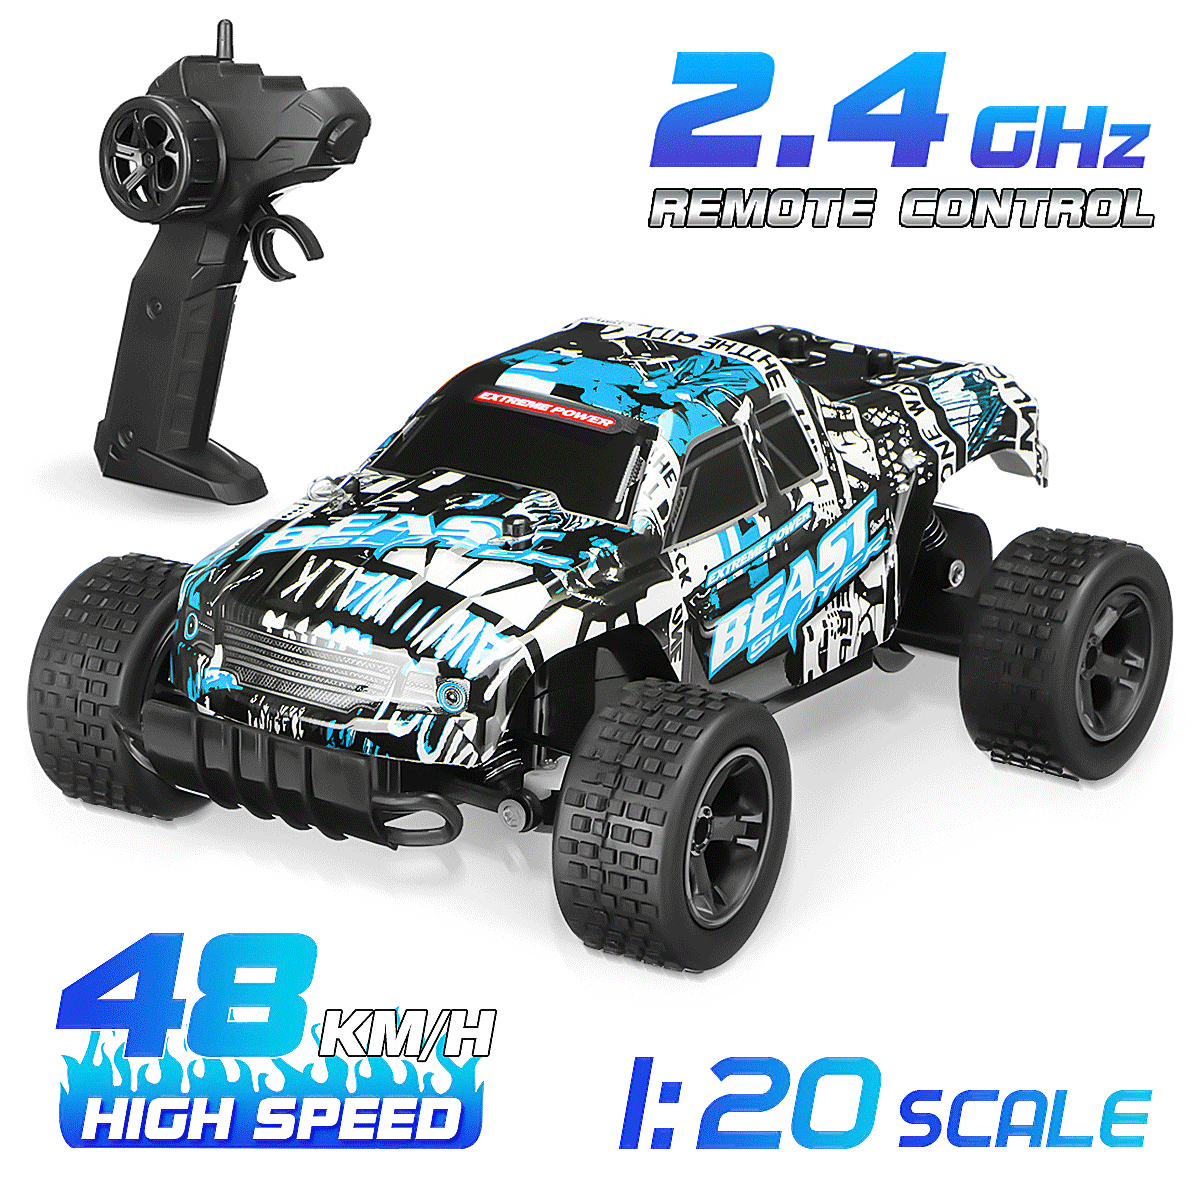 Mini RC Remote Control Speed Racing Car Drift Vehicle for Kids Children